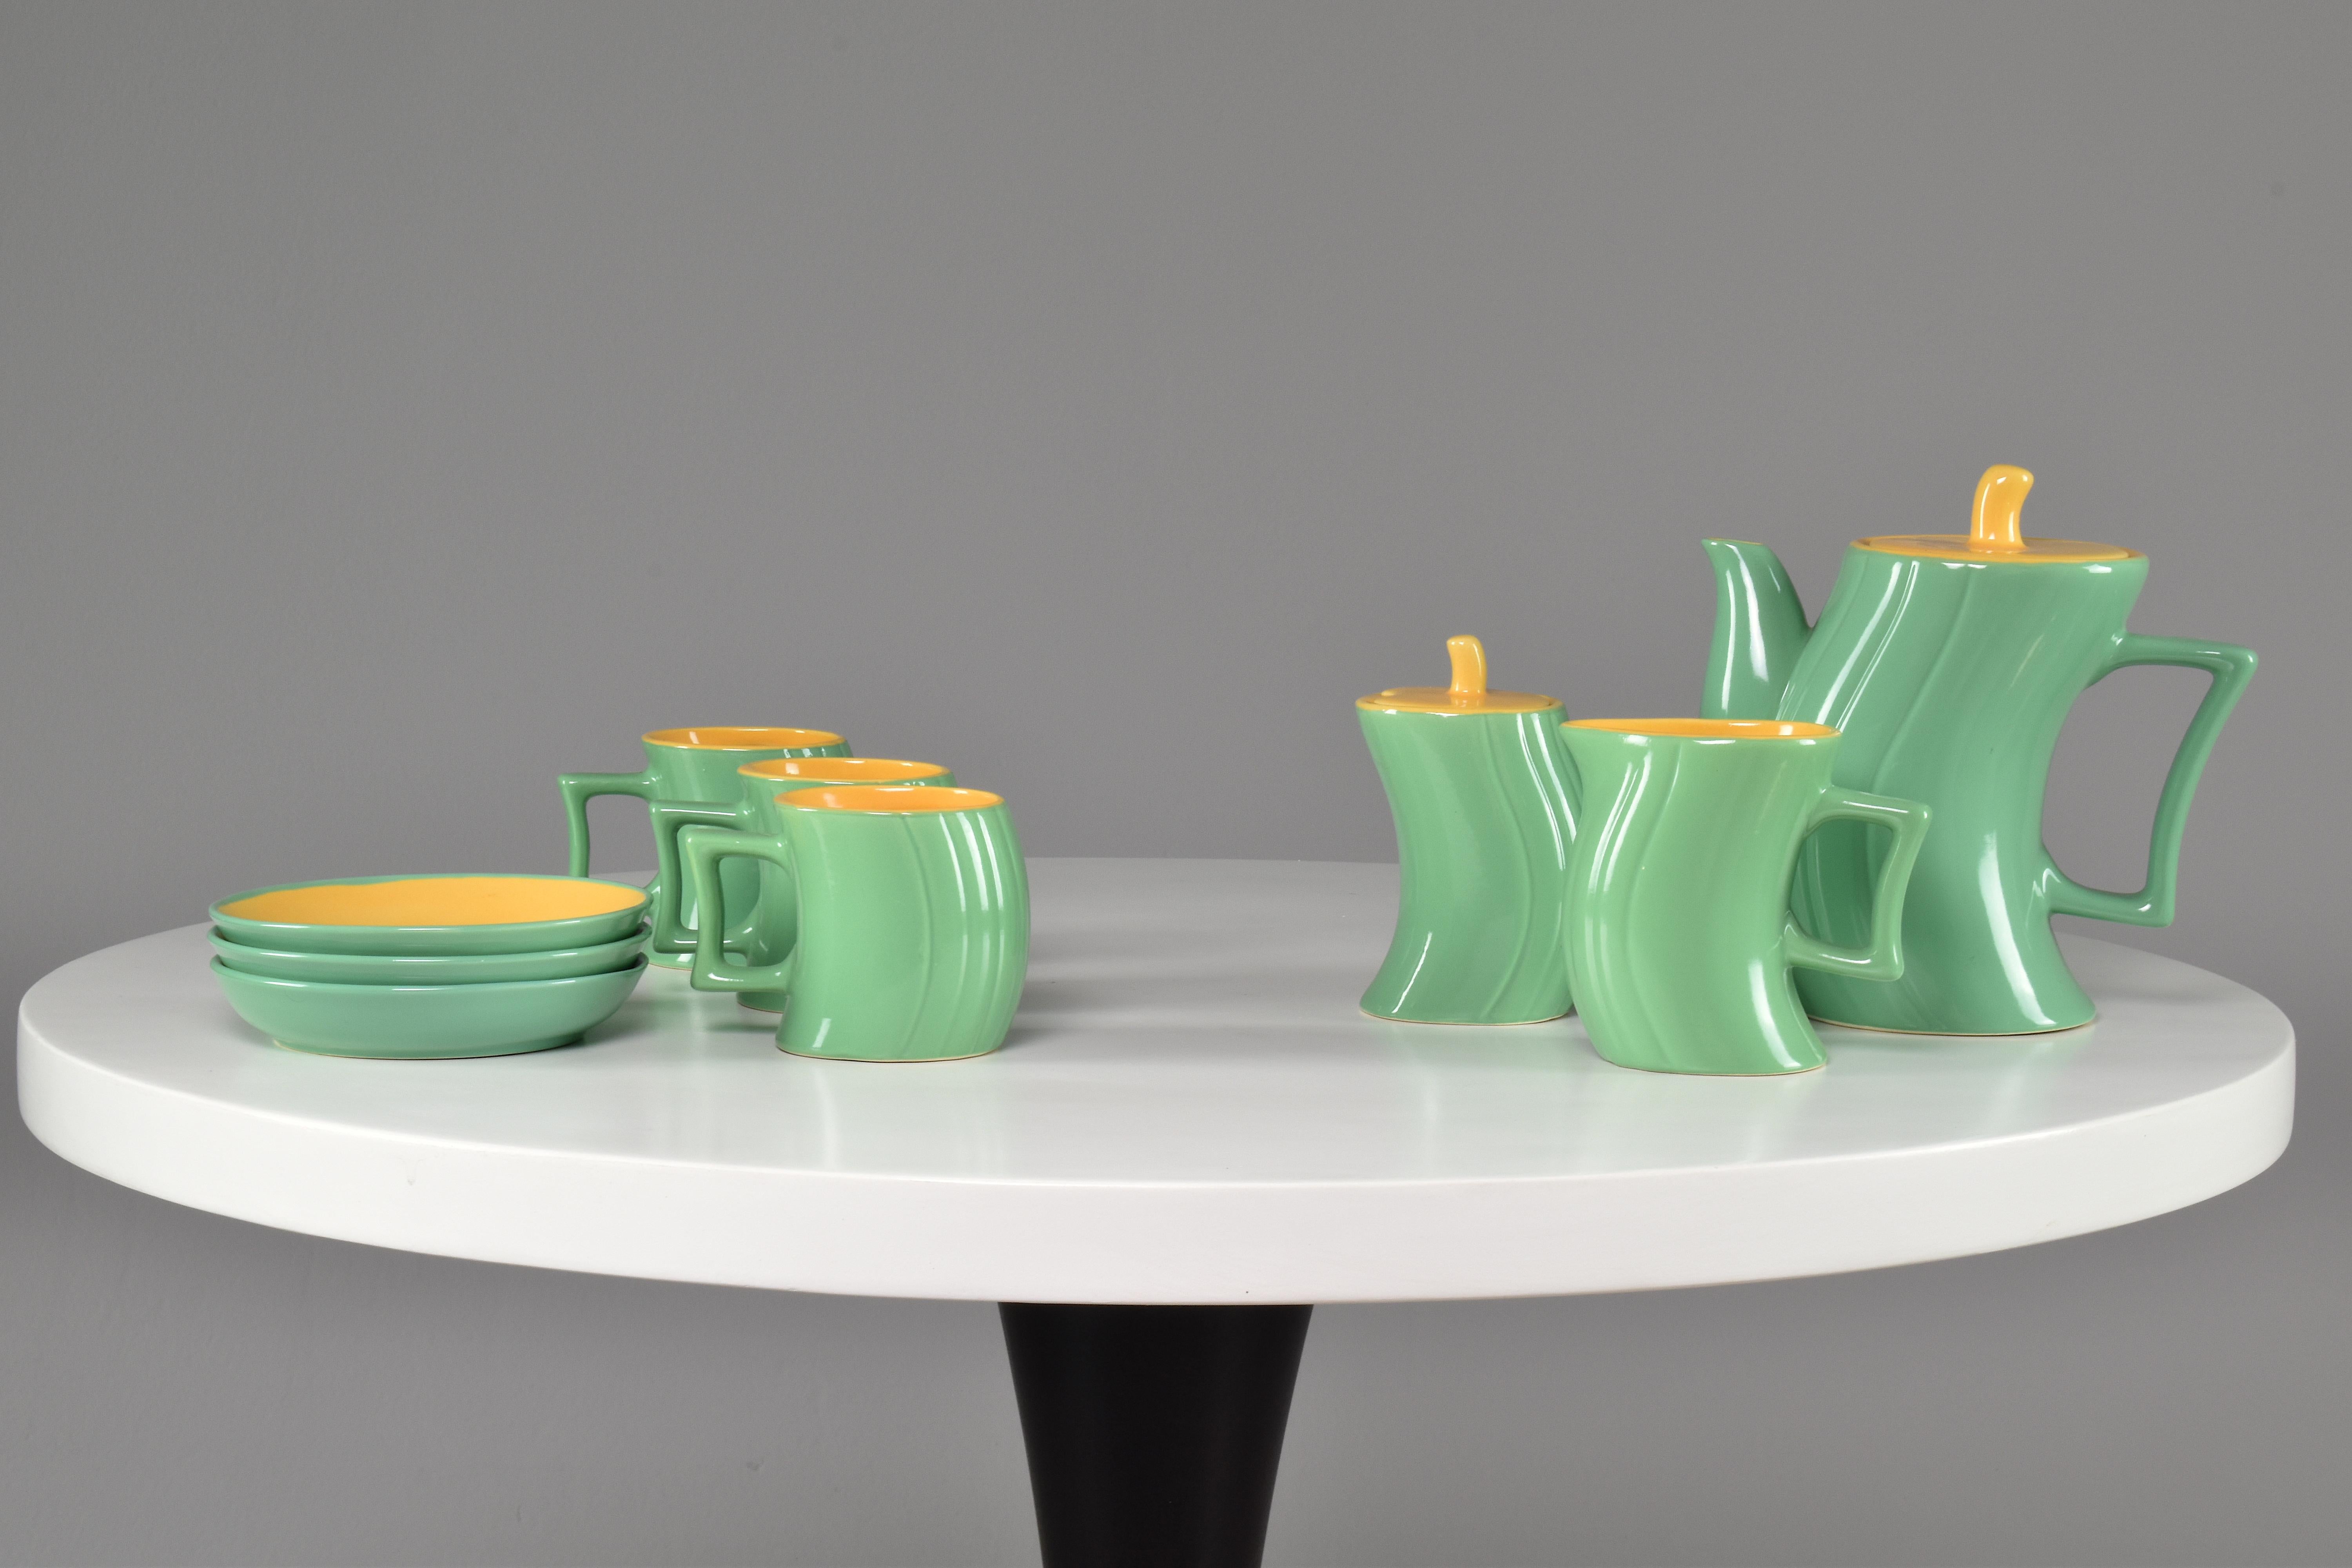 Elegantly crafted with avant-garde curves, this ceramic tea service showcases the distinct artistry of Massimo Iosa Ghini, a luminary in Italian design. Presented in refreshing green mint on the exterior juxtaposed against a warm yellow interior,